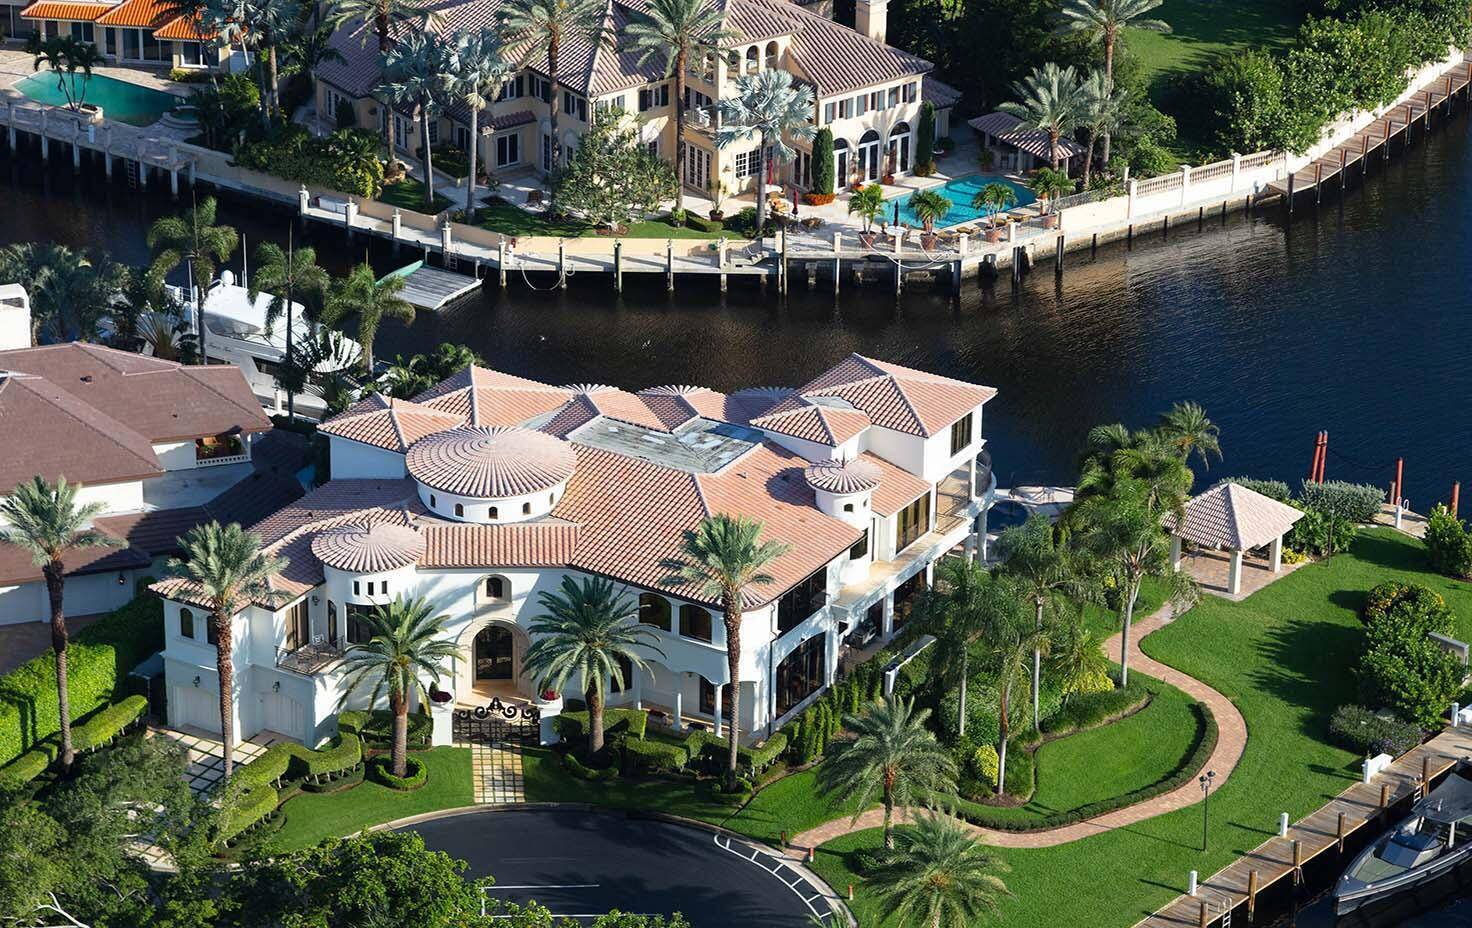 This Sanctuary Deepwater showplace is sited on 116 feet of prime waterfrontage overlooking the Intracoastal constructed by Cudmore Builders and award winning Affiniti Architects.